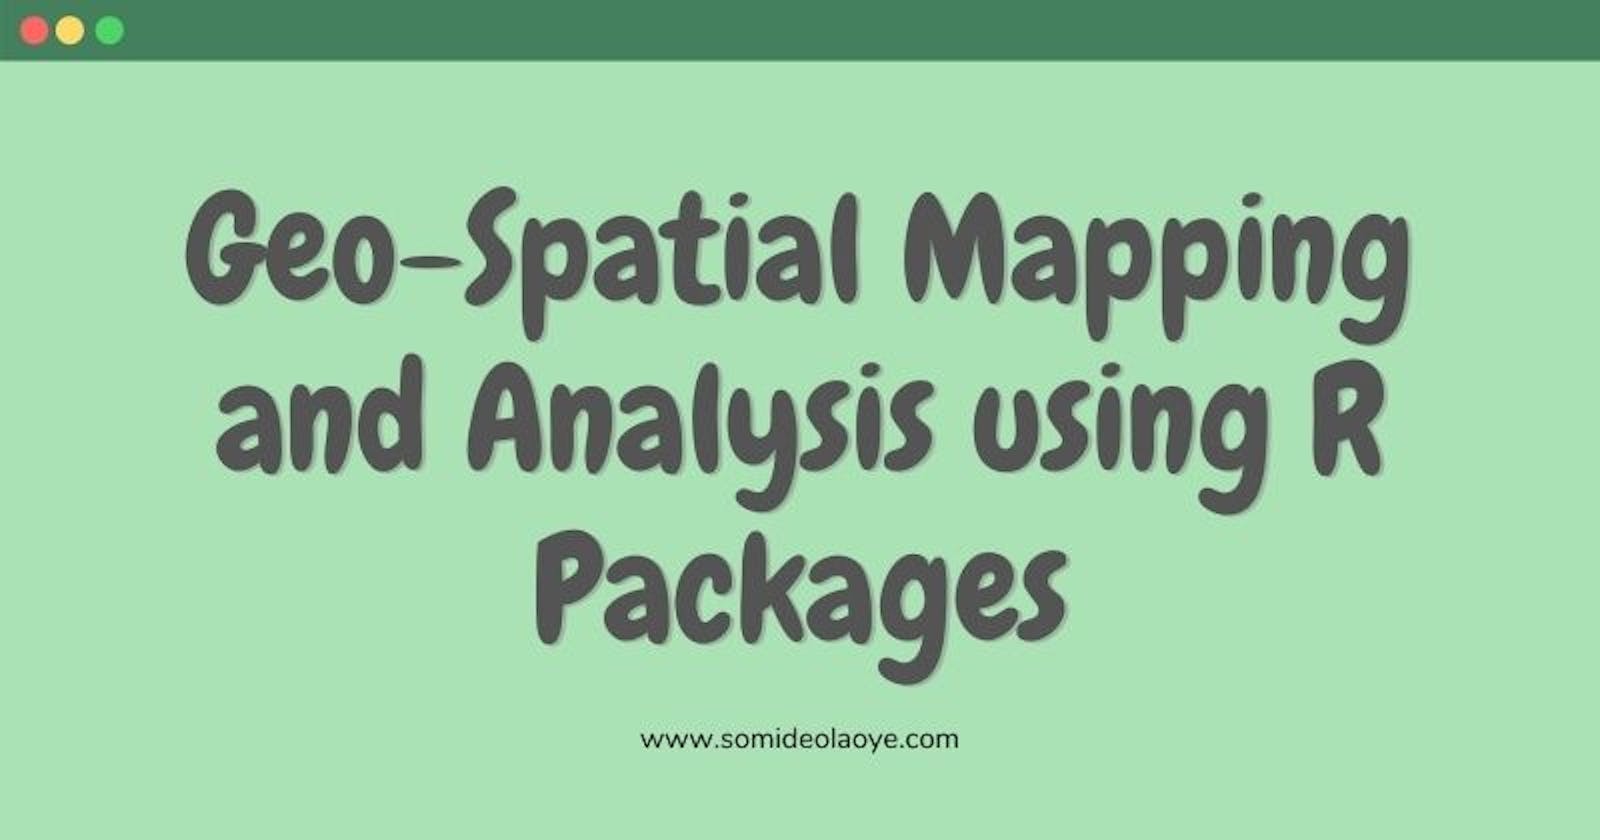 Geo-Spatial Mapping and Analysis using R Packages